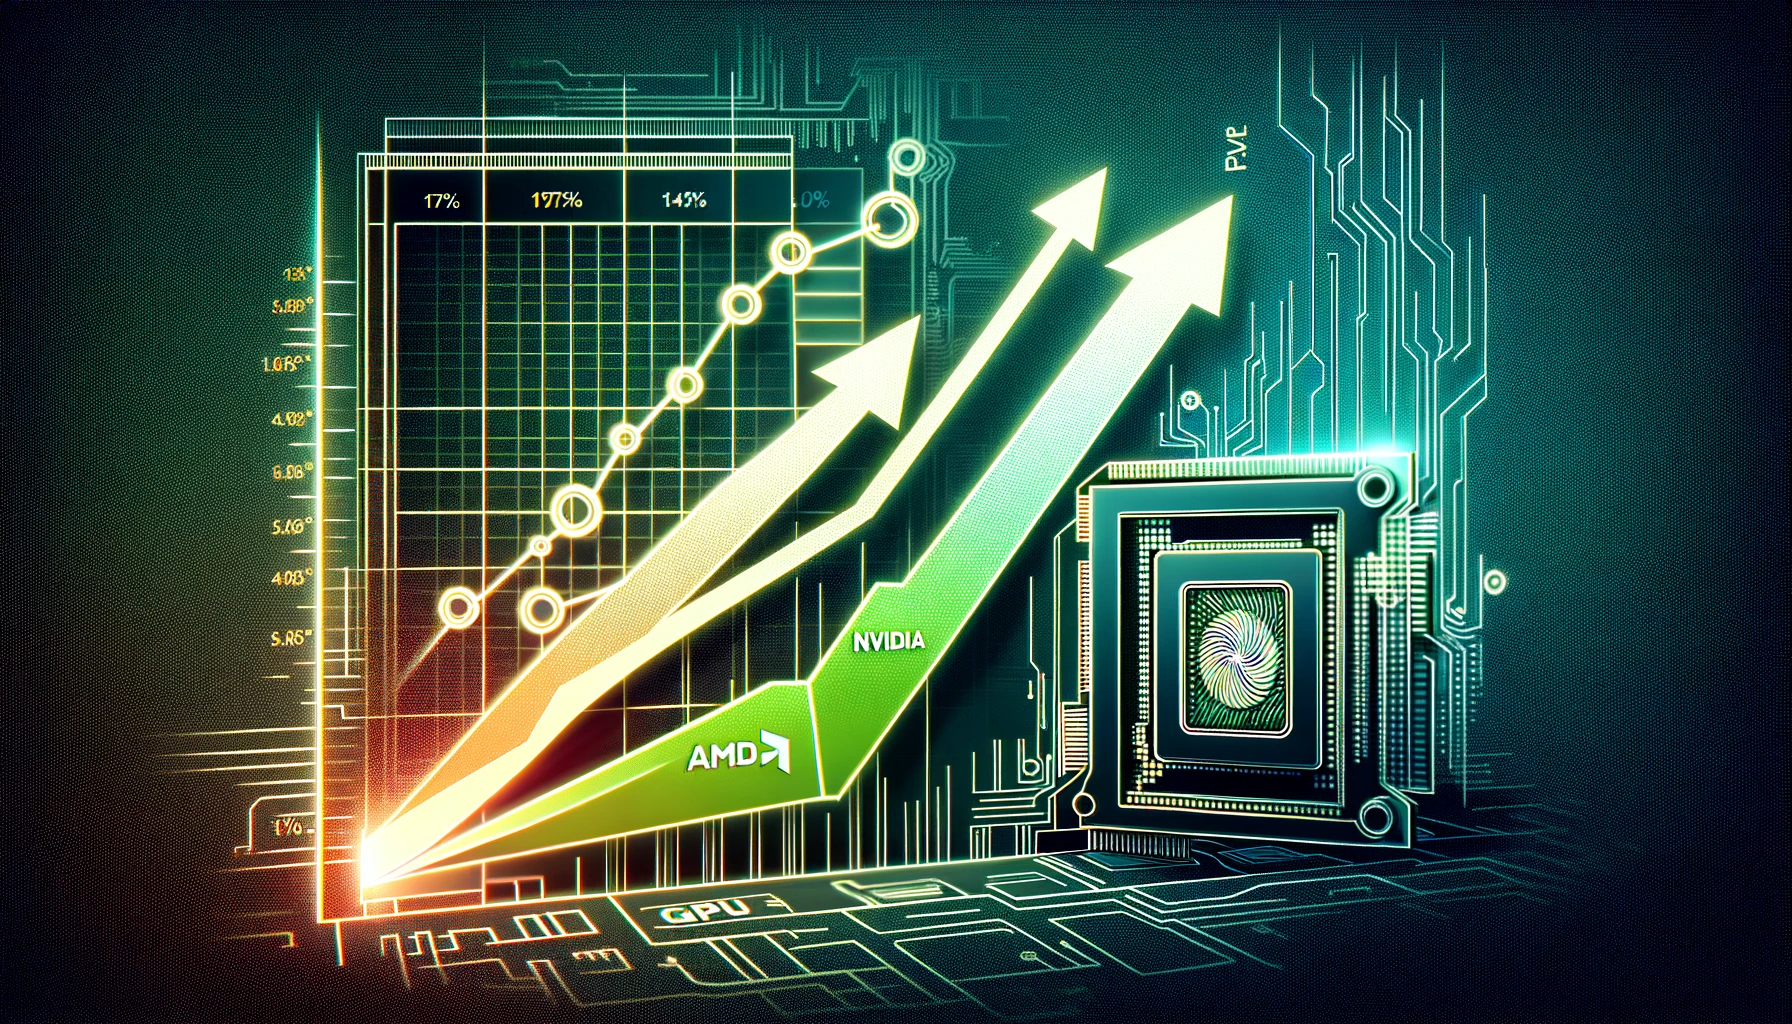 AMD’s discrete AIB GPU shipments increased by 17%, while NVIDIA’s rose by 4.7% in Q4 2023, resulting in a 32% overall market growth